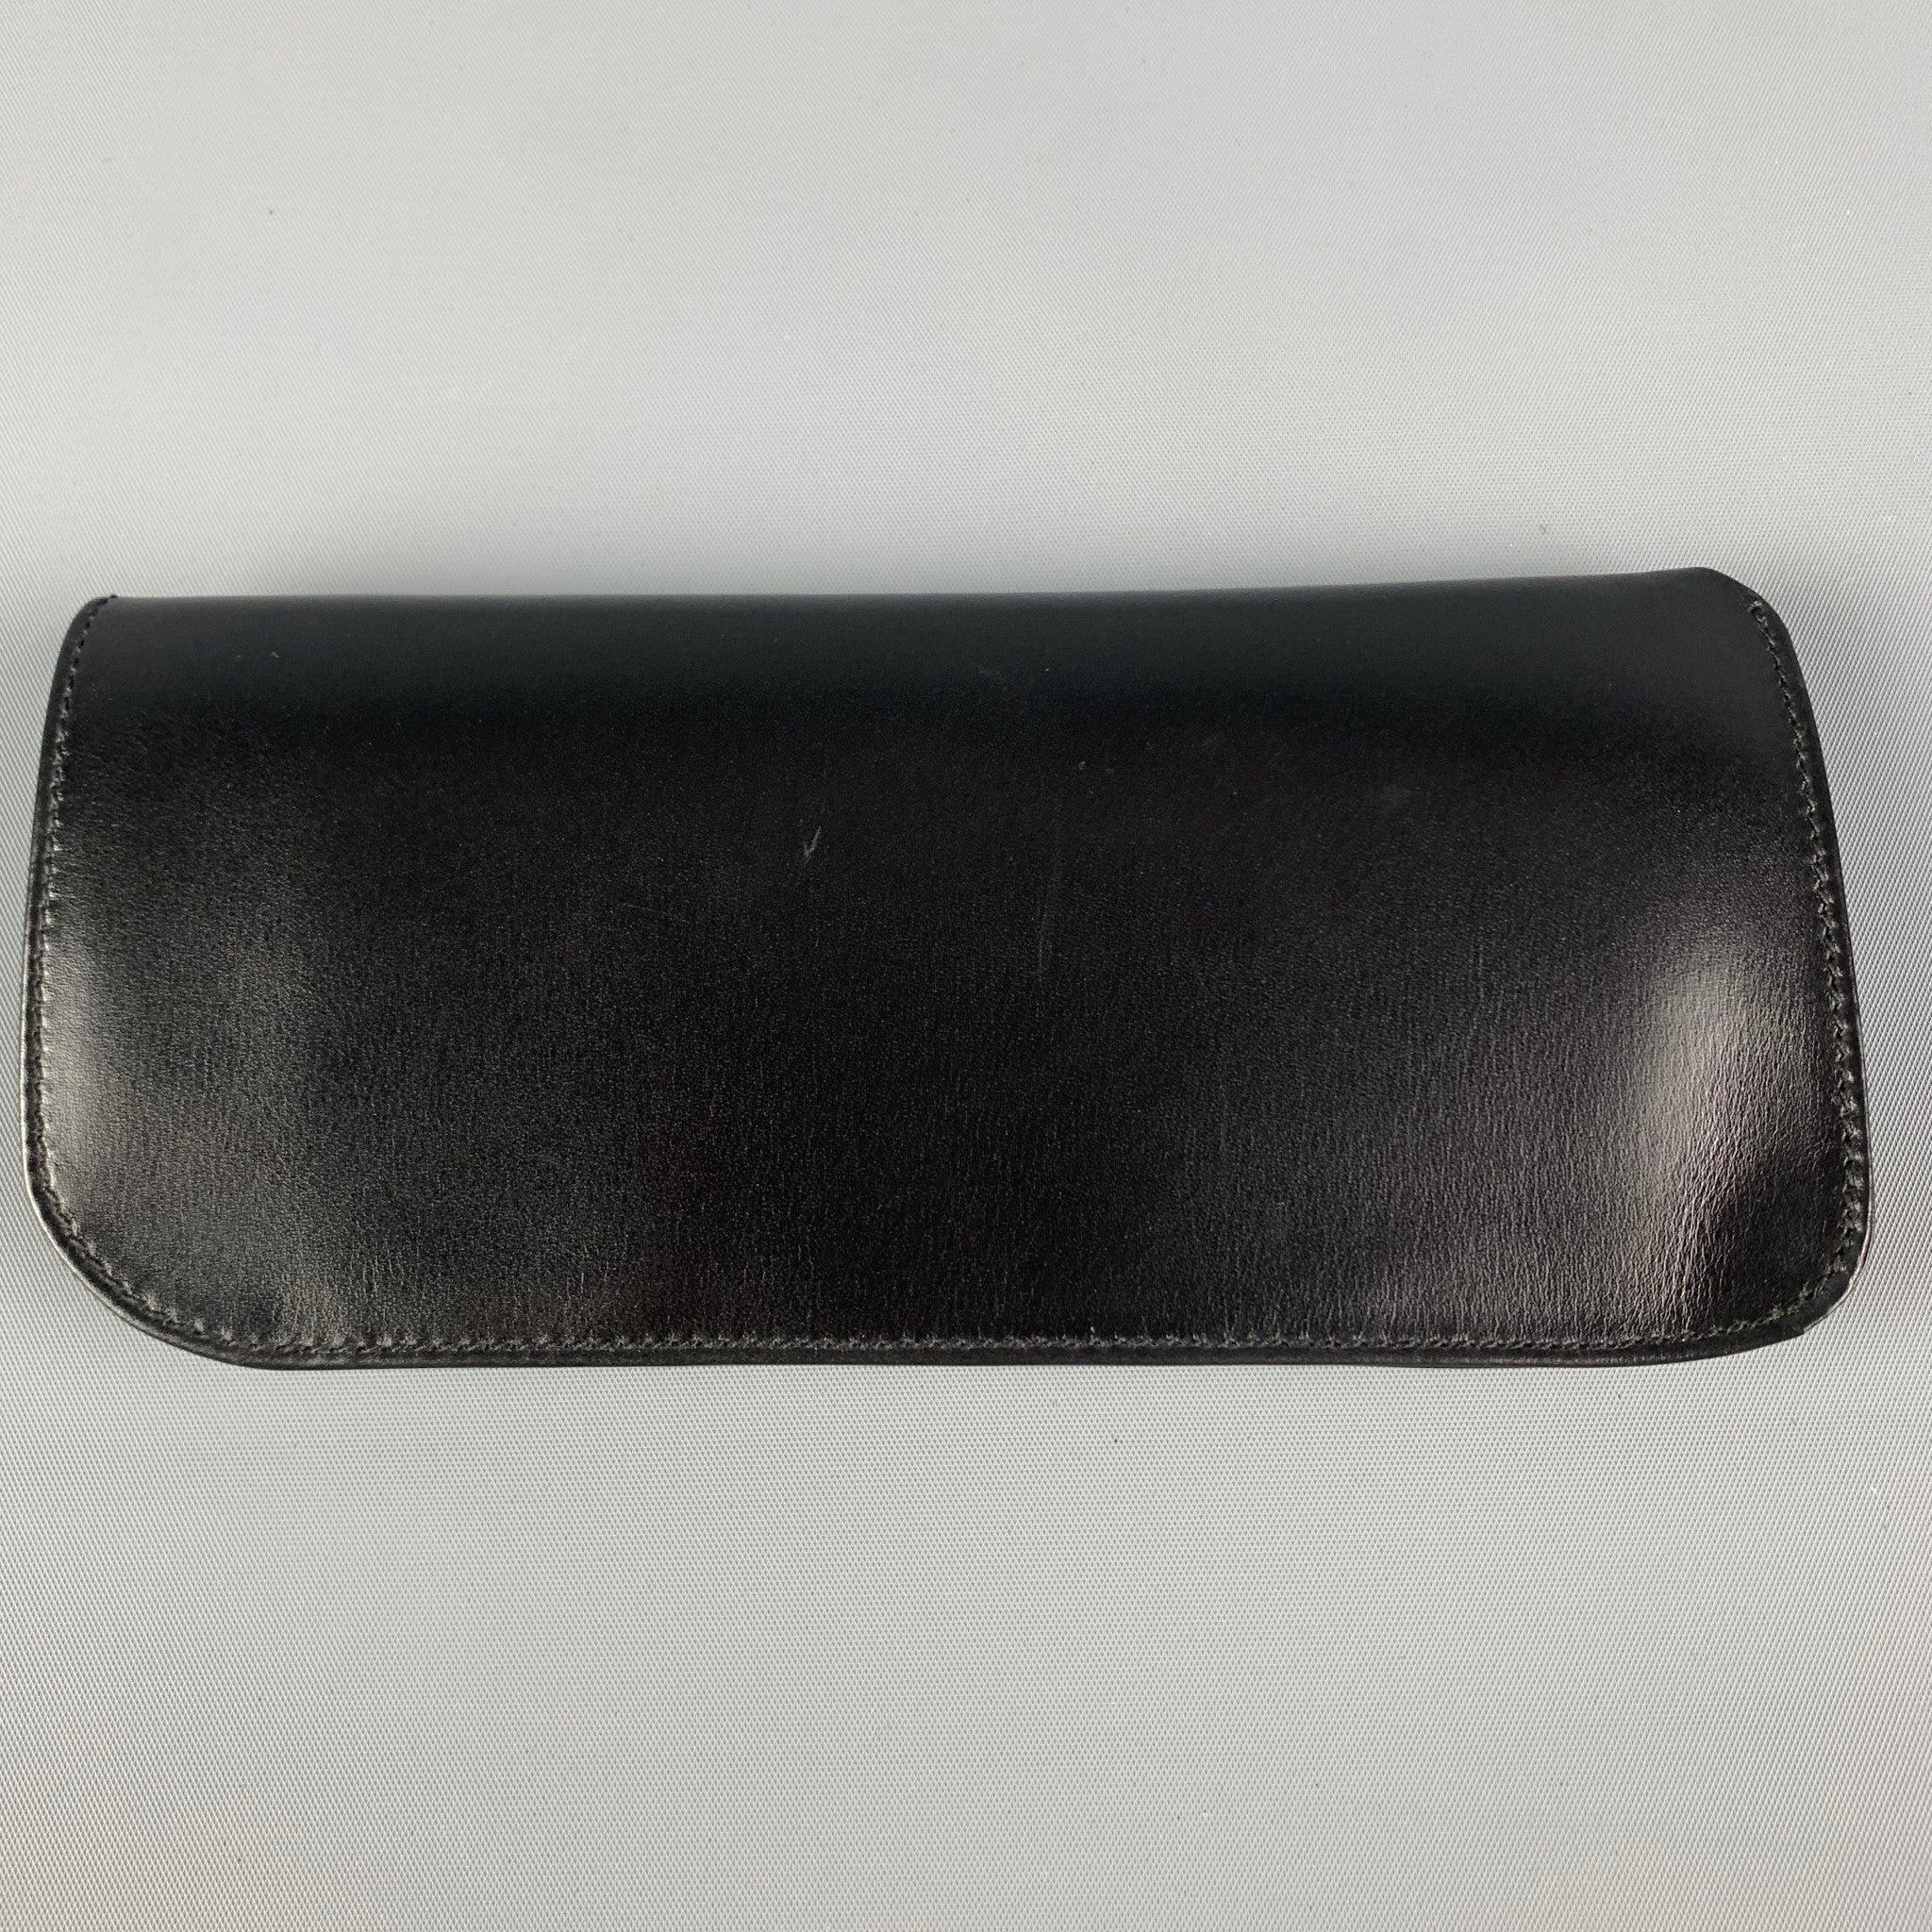 Vintage GUCCI sunglasses case comes in a black leather featuring a gold tone logo emblem. Includes box. Made in Italy.
 Very Good
 Pre-Owned Condition. 
 

 Marked: 
 

 Measurements: 
  Height: 3.25 inches Length: 7 inches 
  
  
  
 Sui Generis